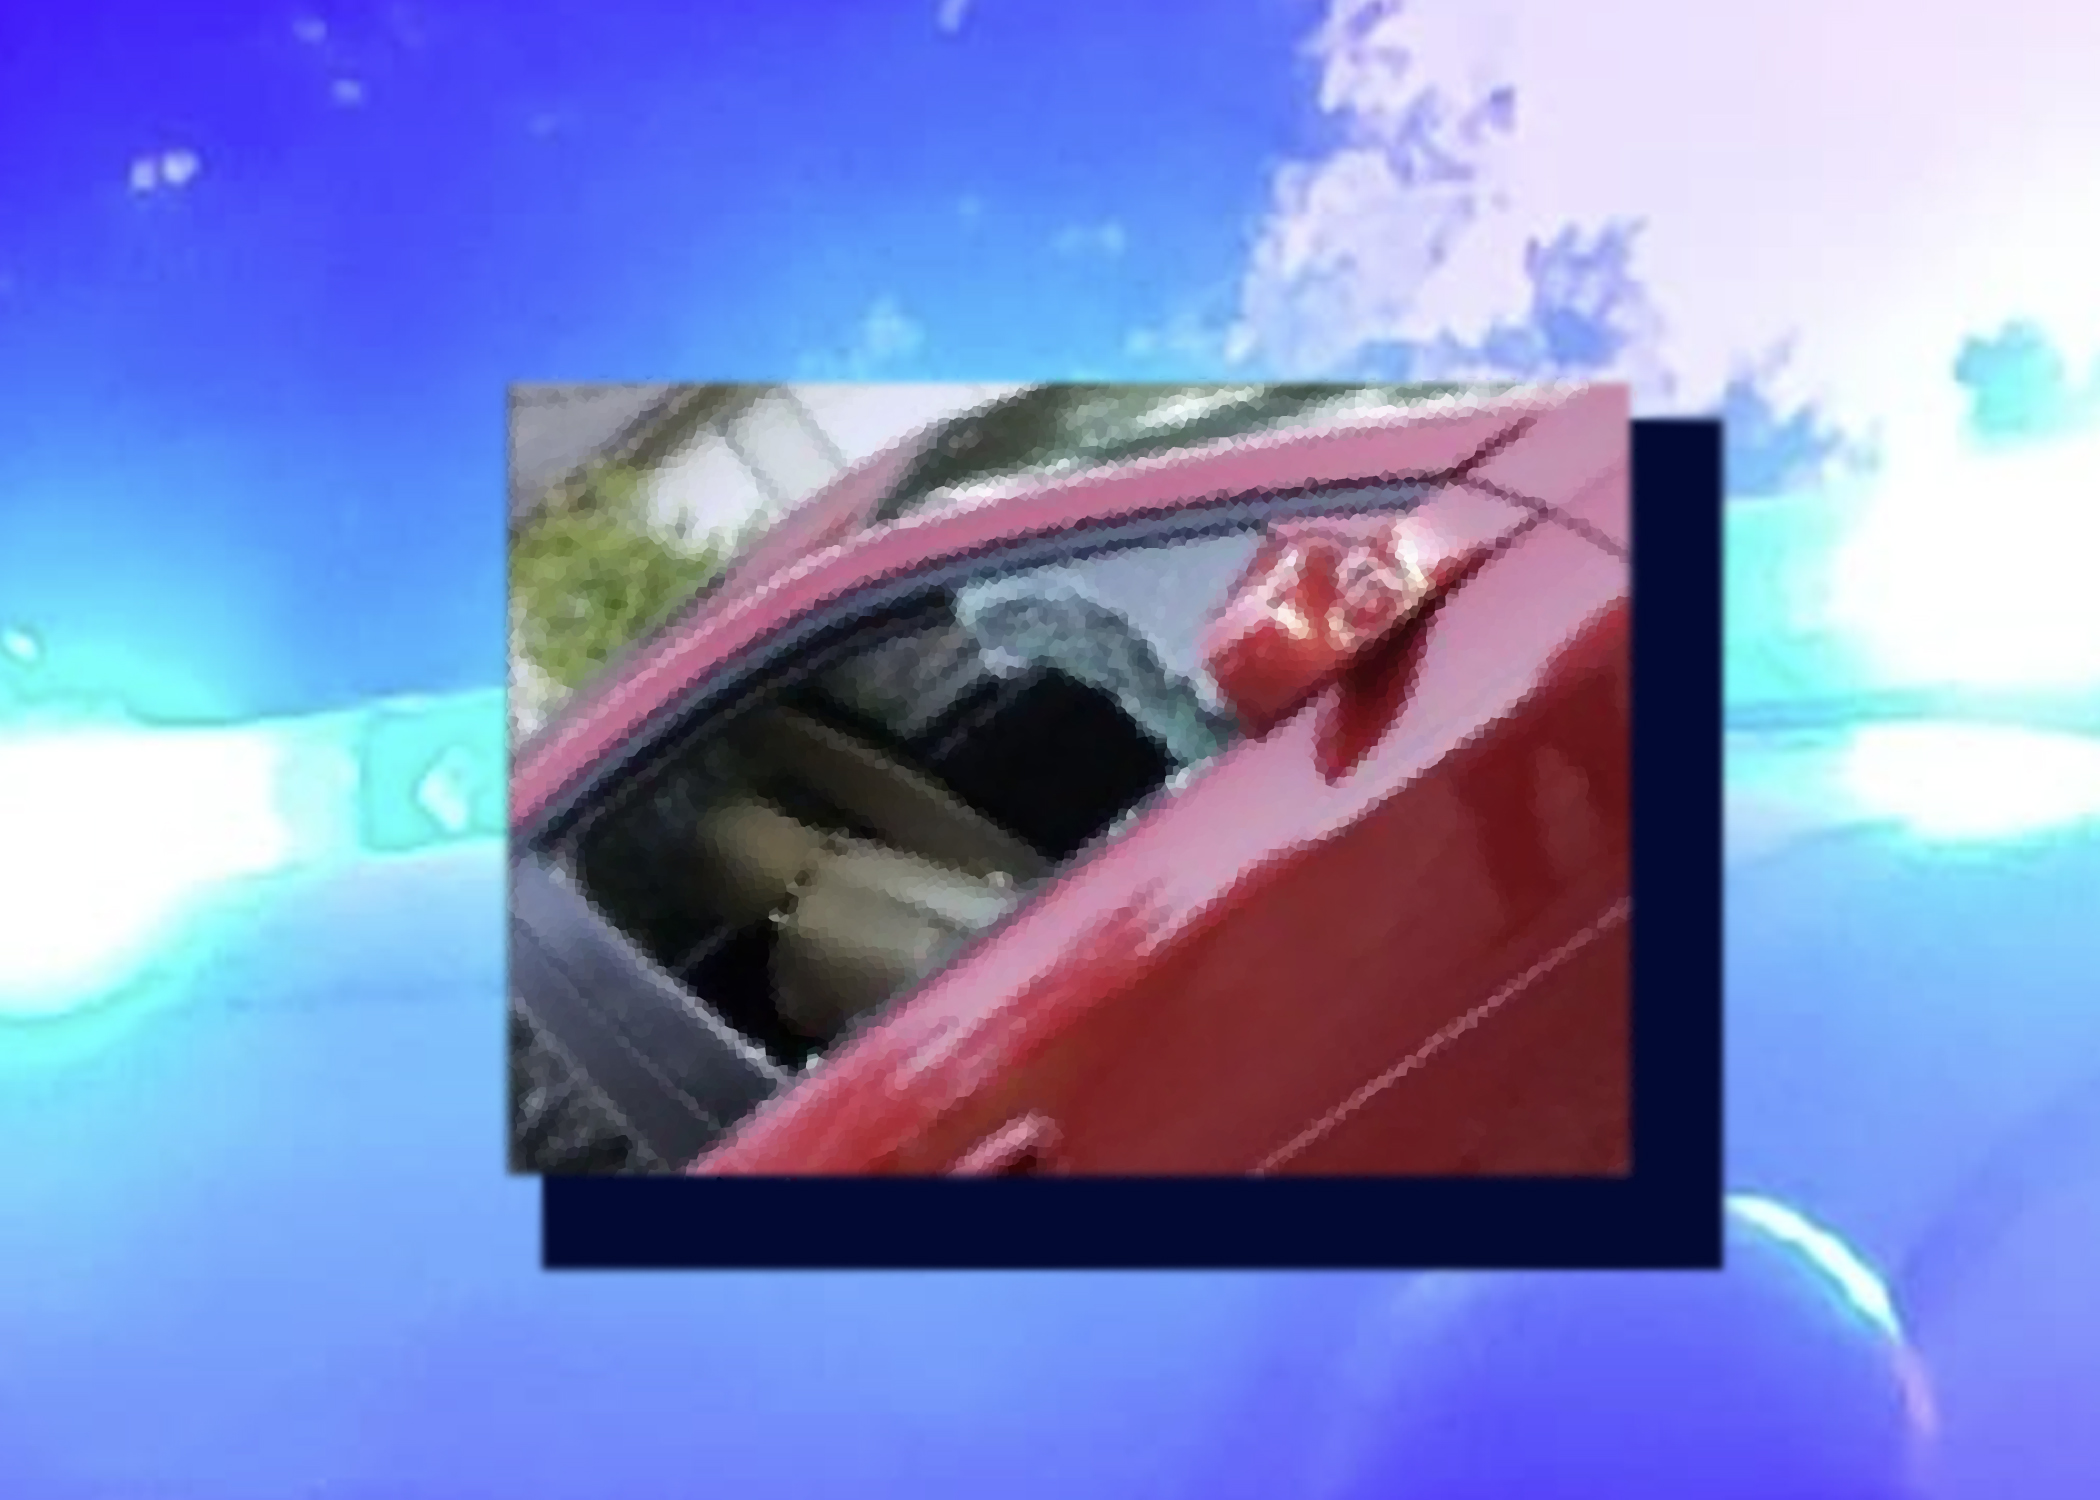 Crooks hit vehicles in parking lots of 2 Trussville gyms